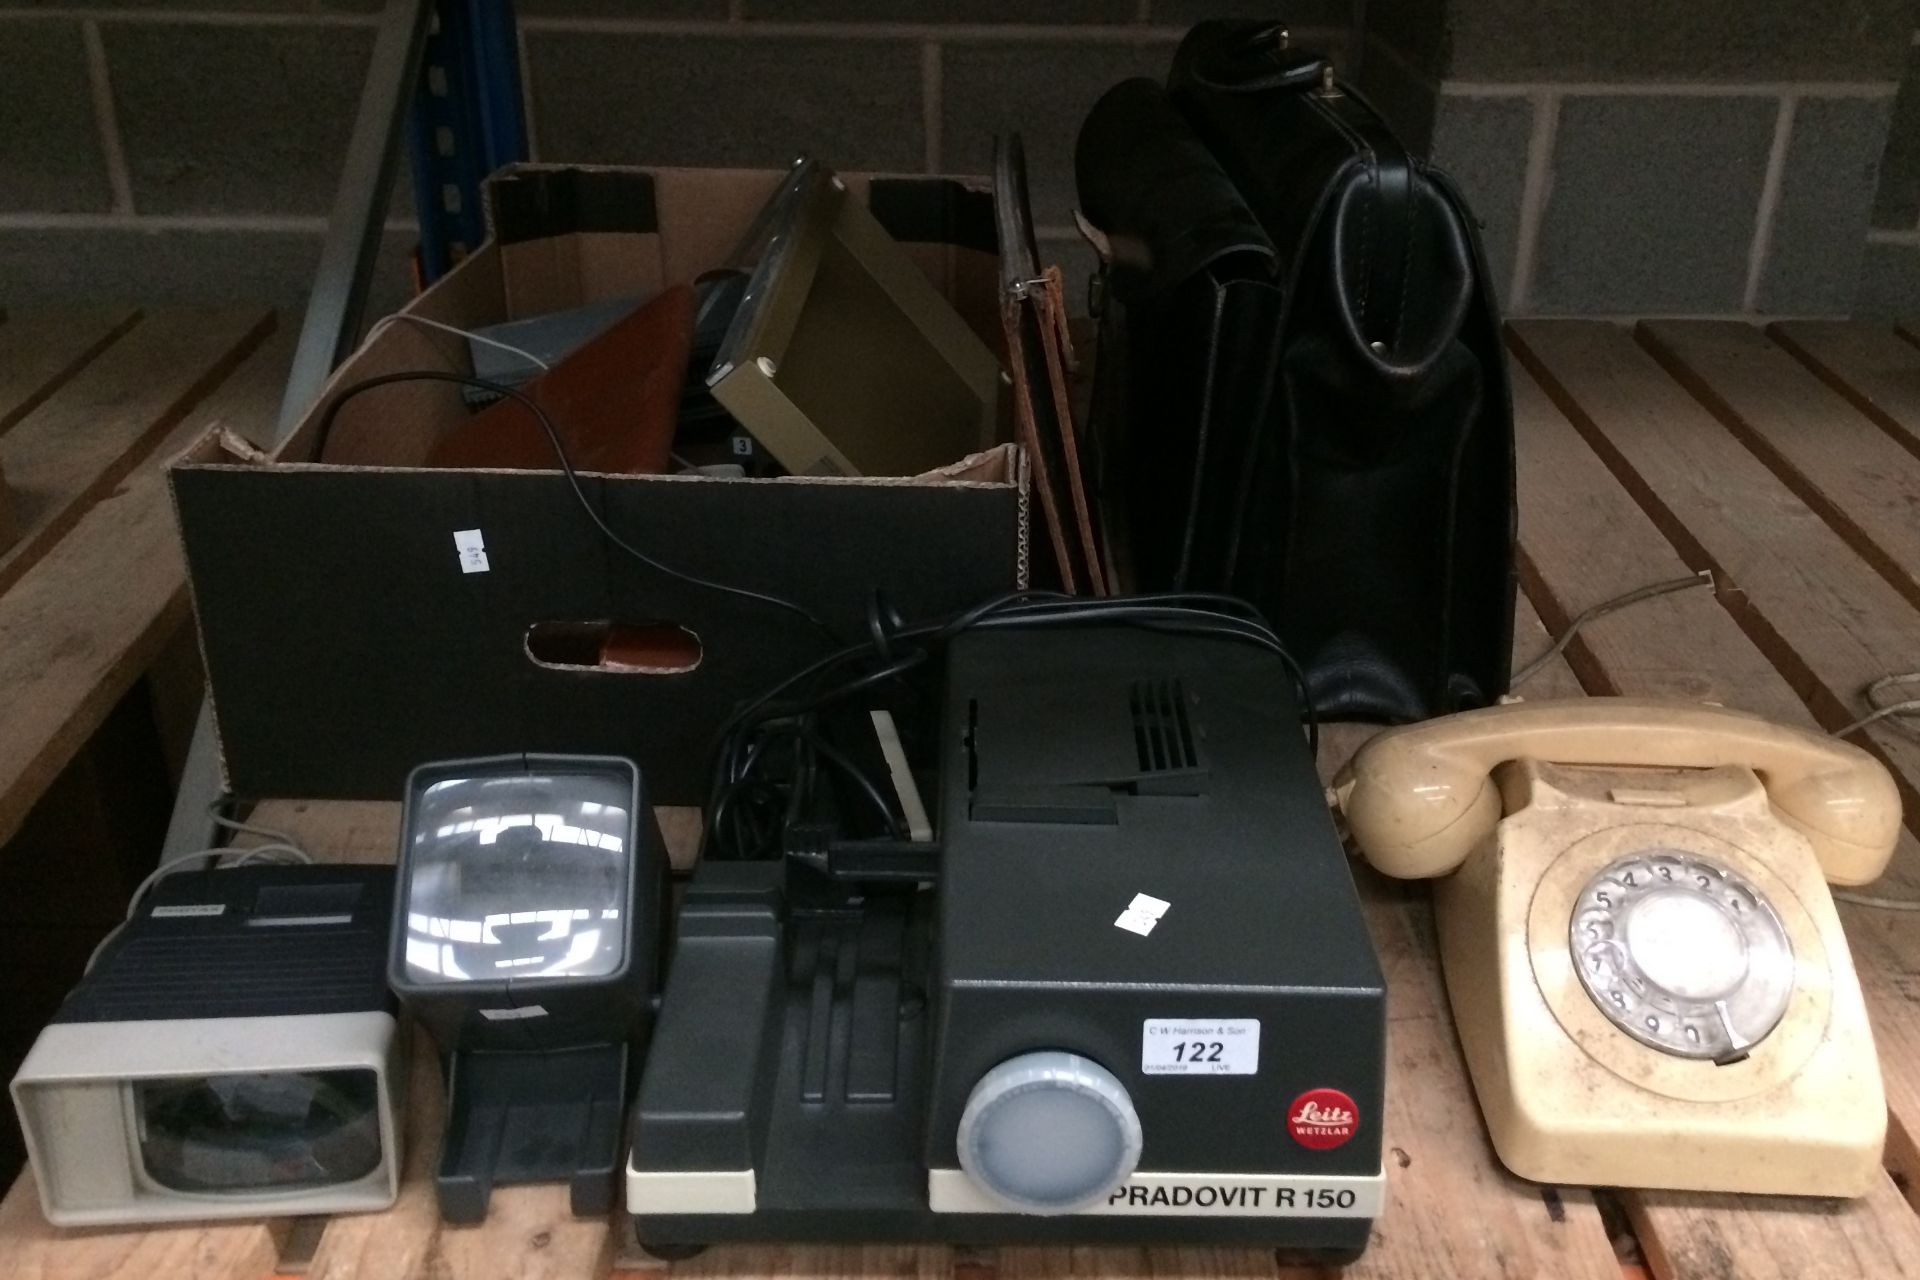 A Pradovit R150 slide projector (not tested), vintage telephone, leather briefcase, etc.